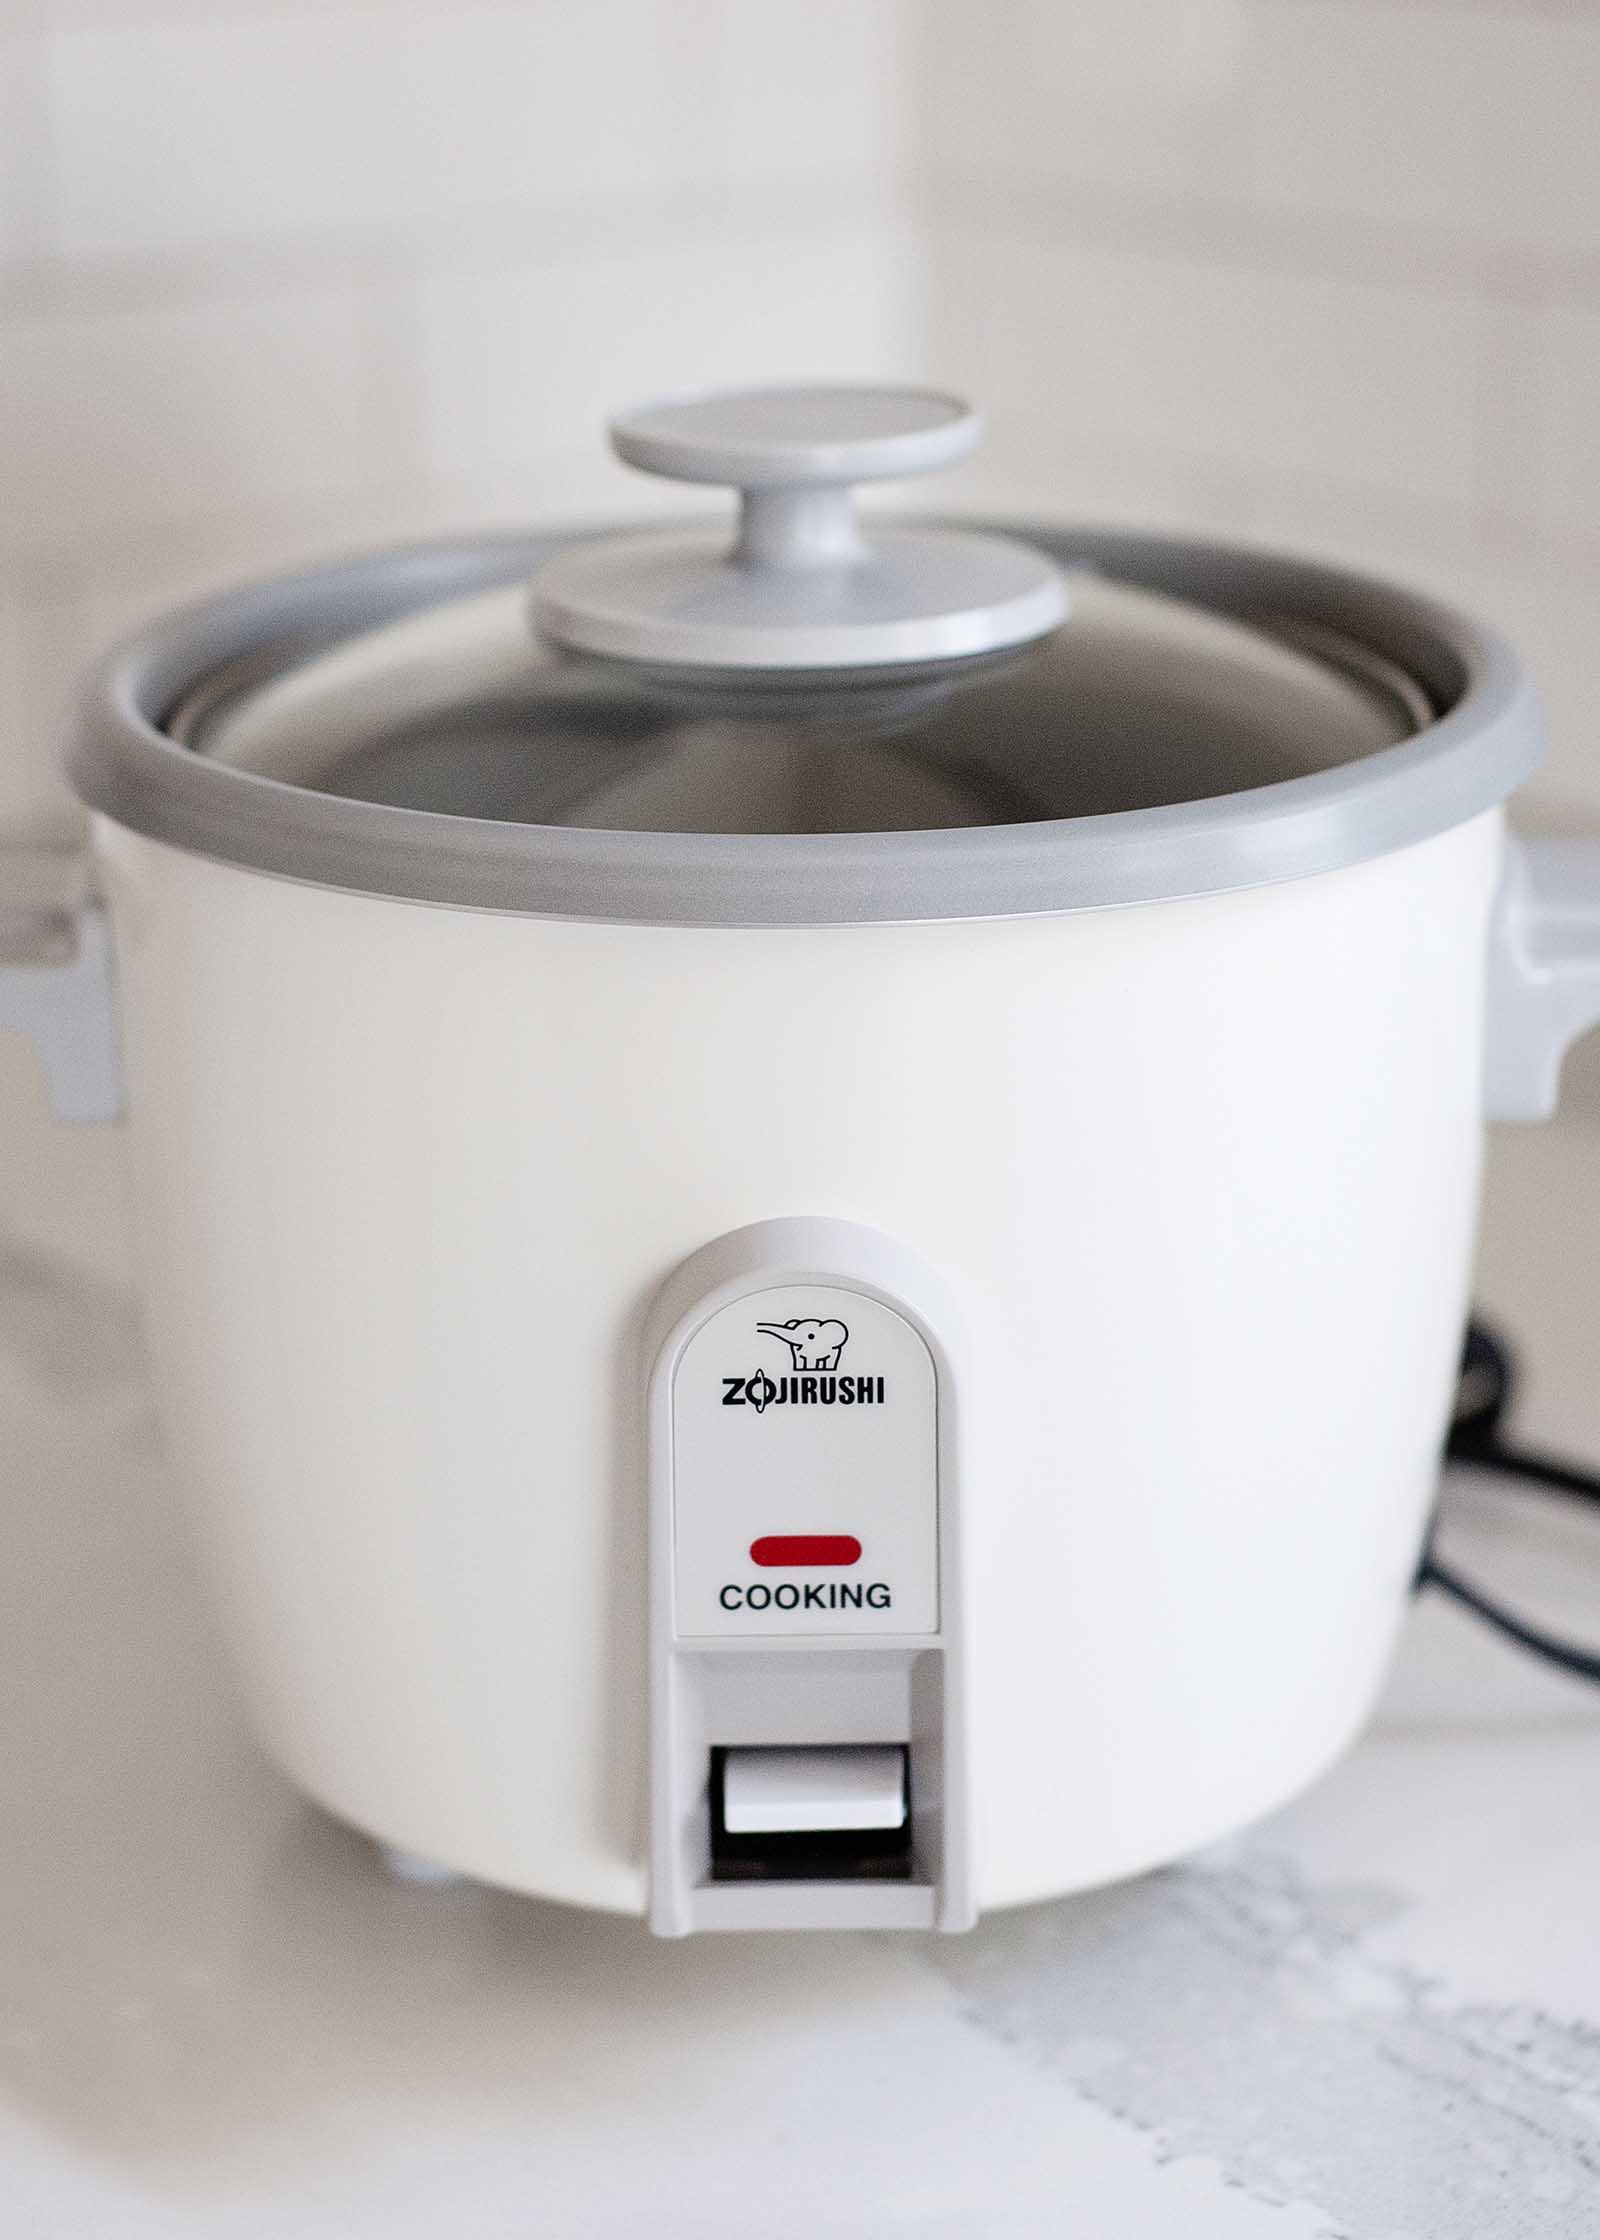 Side view of a Zojirushi rice cooker on a white countertop.